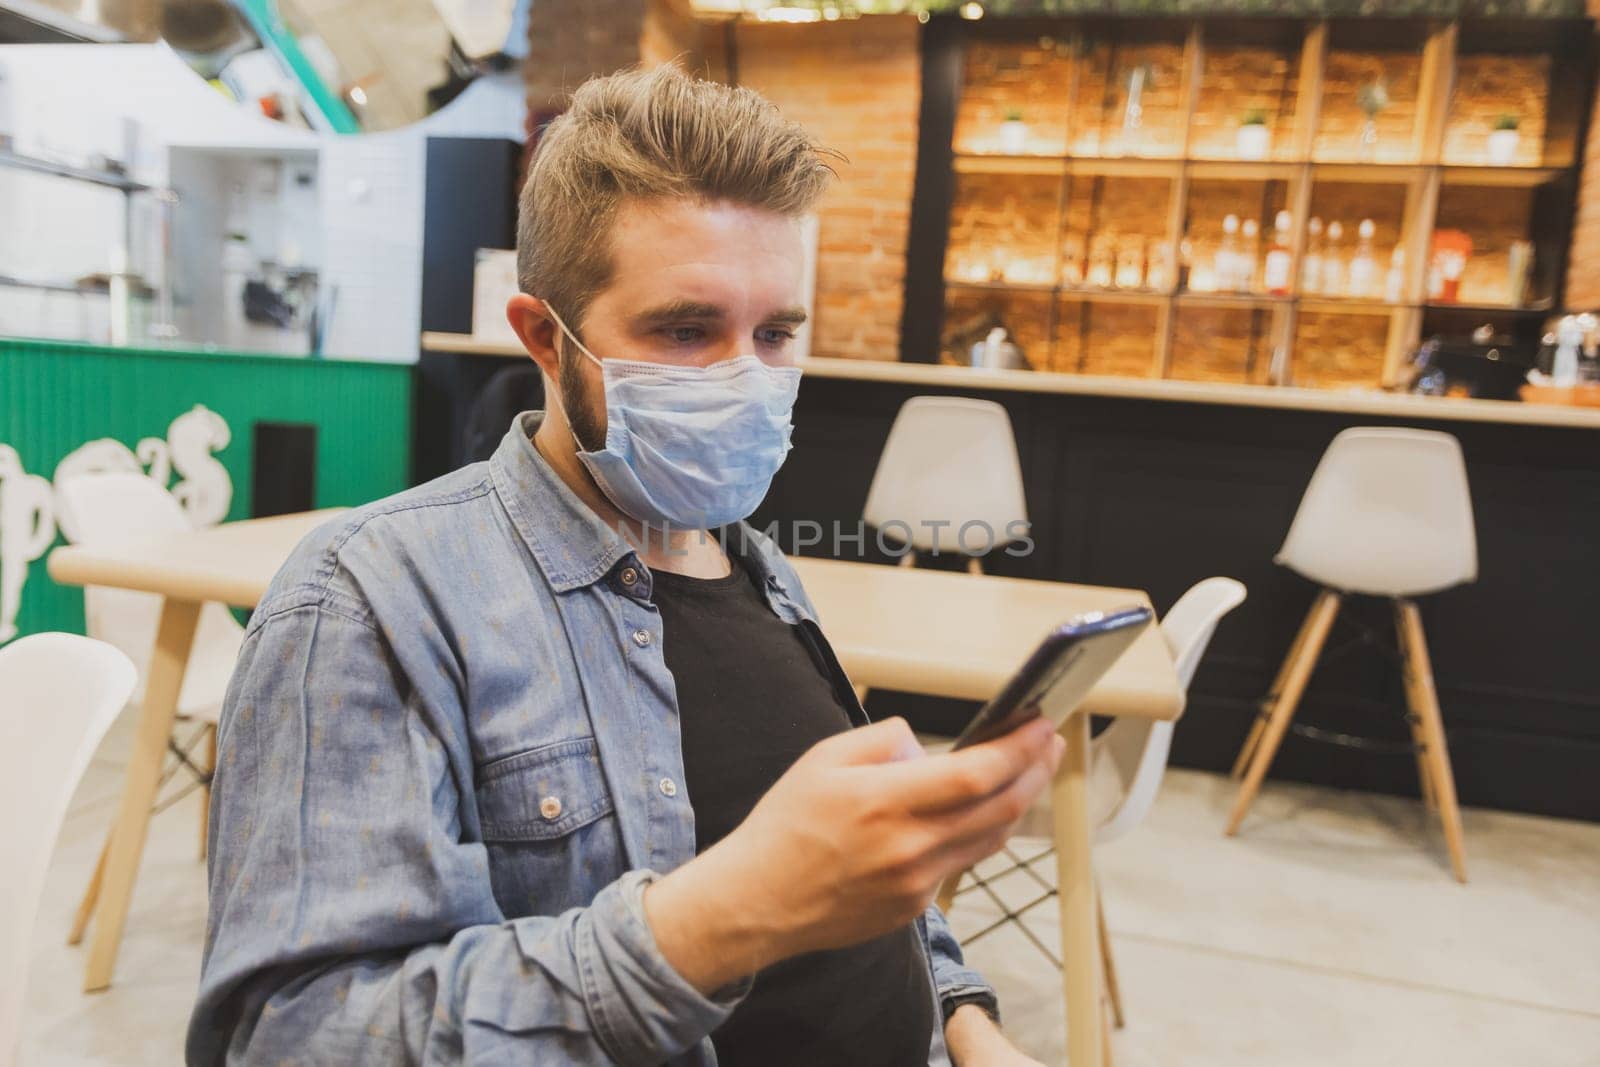 Man wears medical face mask in public area and using smartphone to do work business and social network communication in public cafe work space area